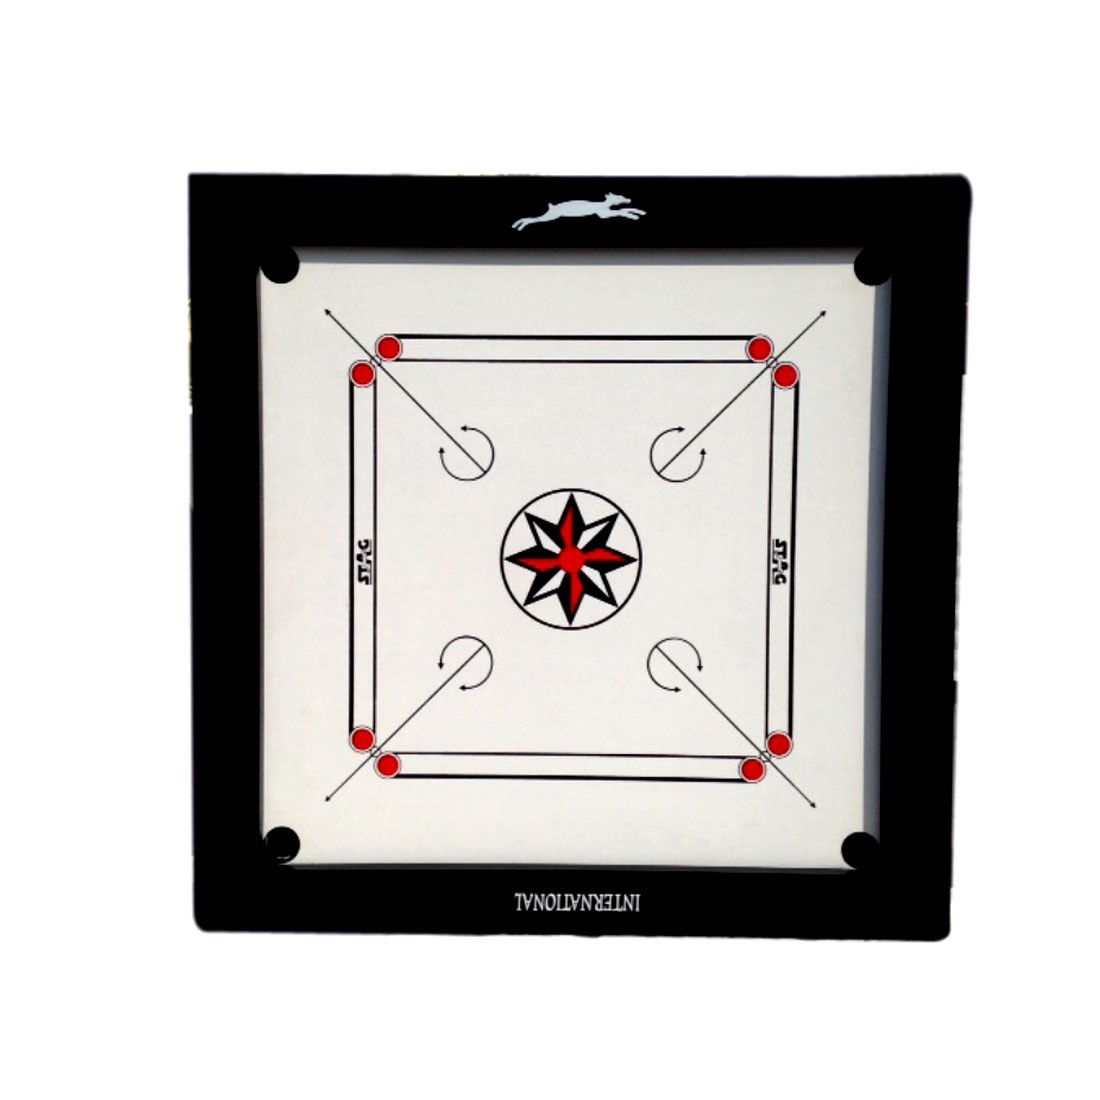 STAG CARROM BOARD INT. 3" BORDER 12MM Prelaminated Particle Board WITH LOW STAND